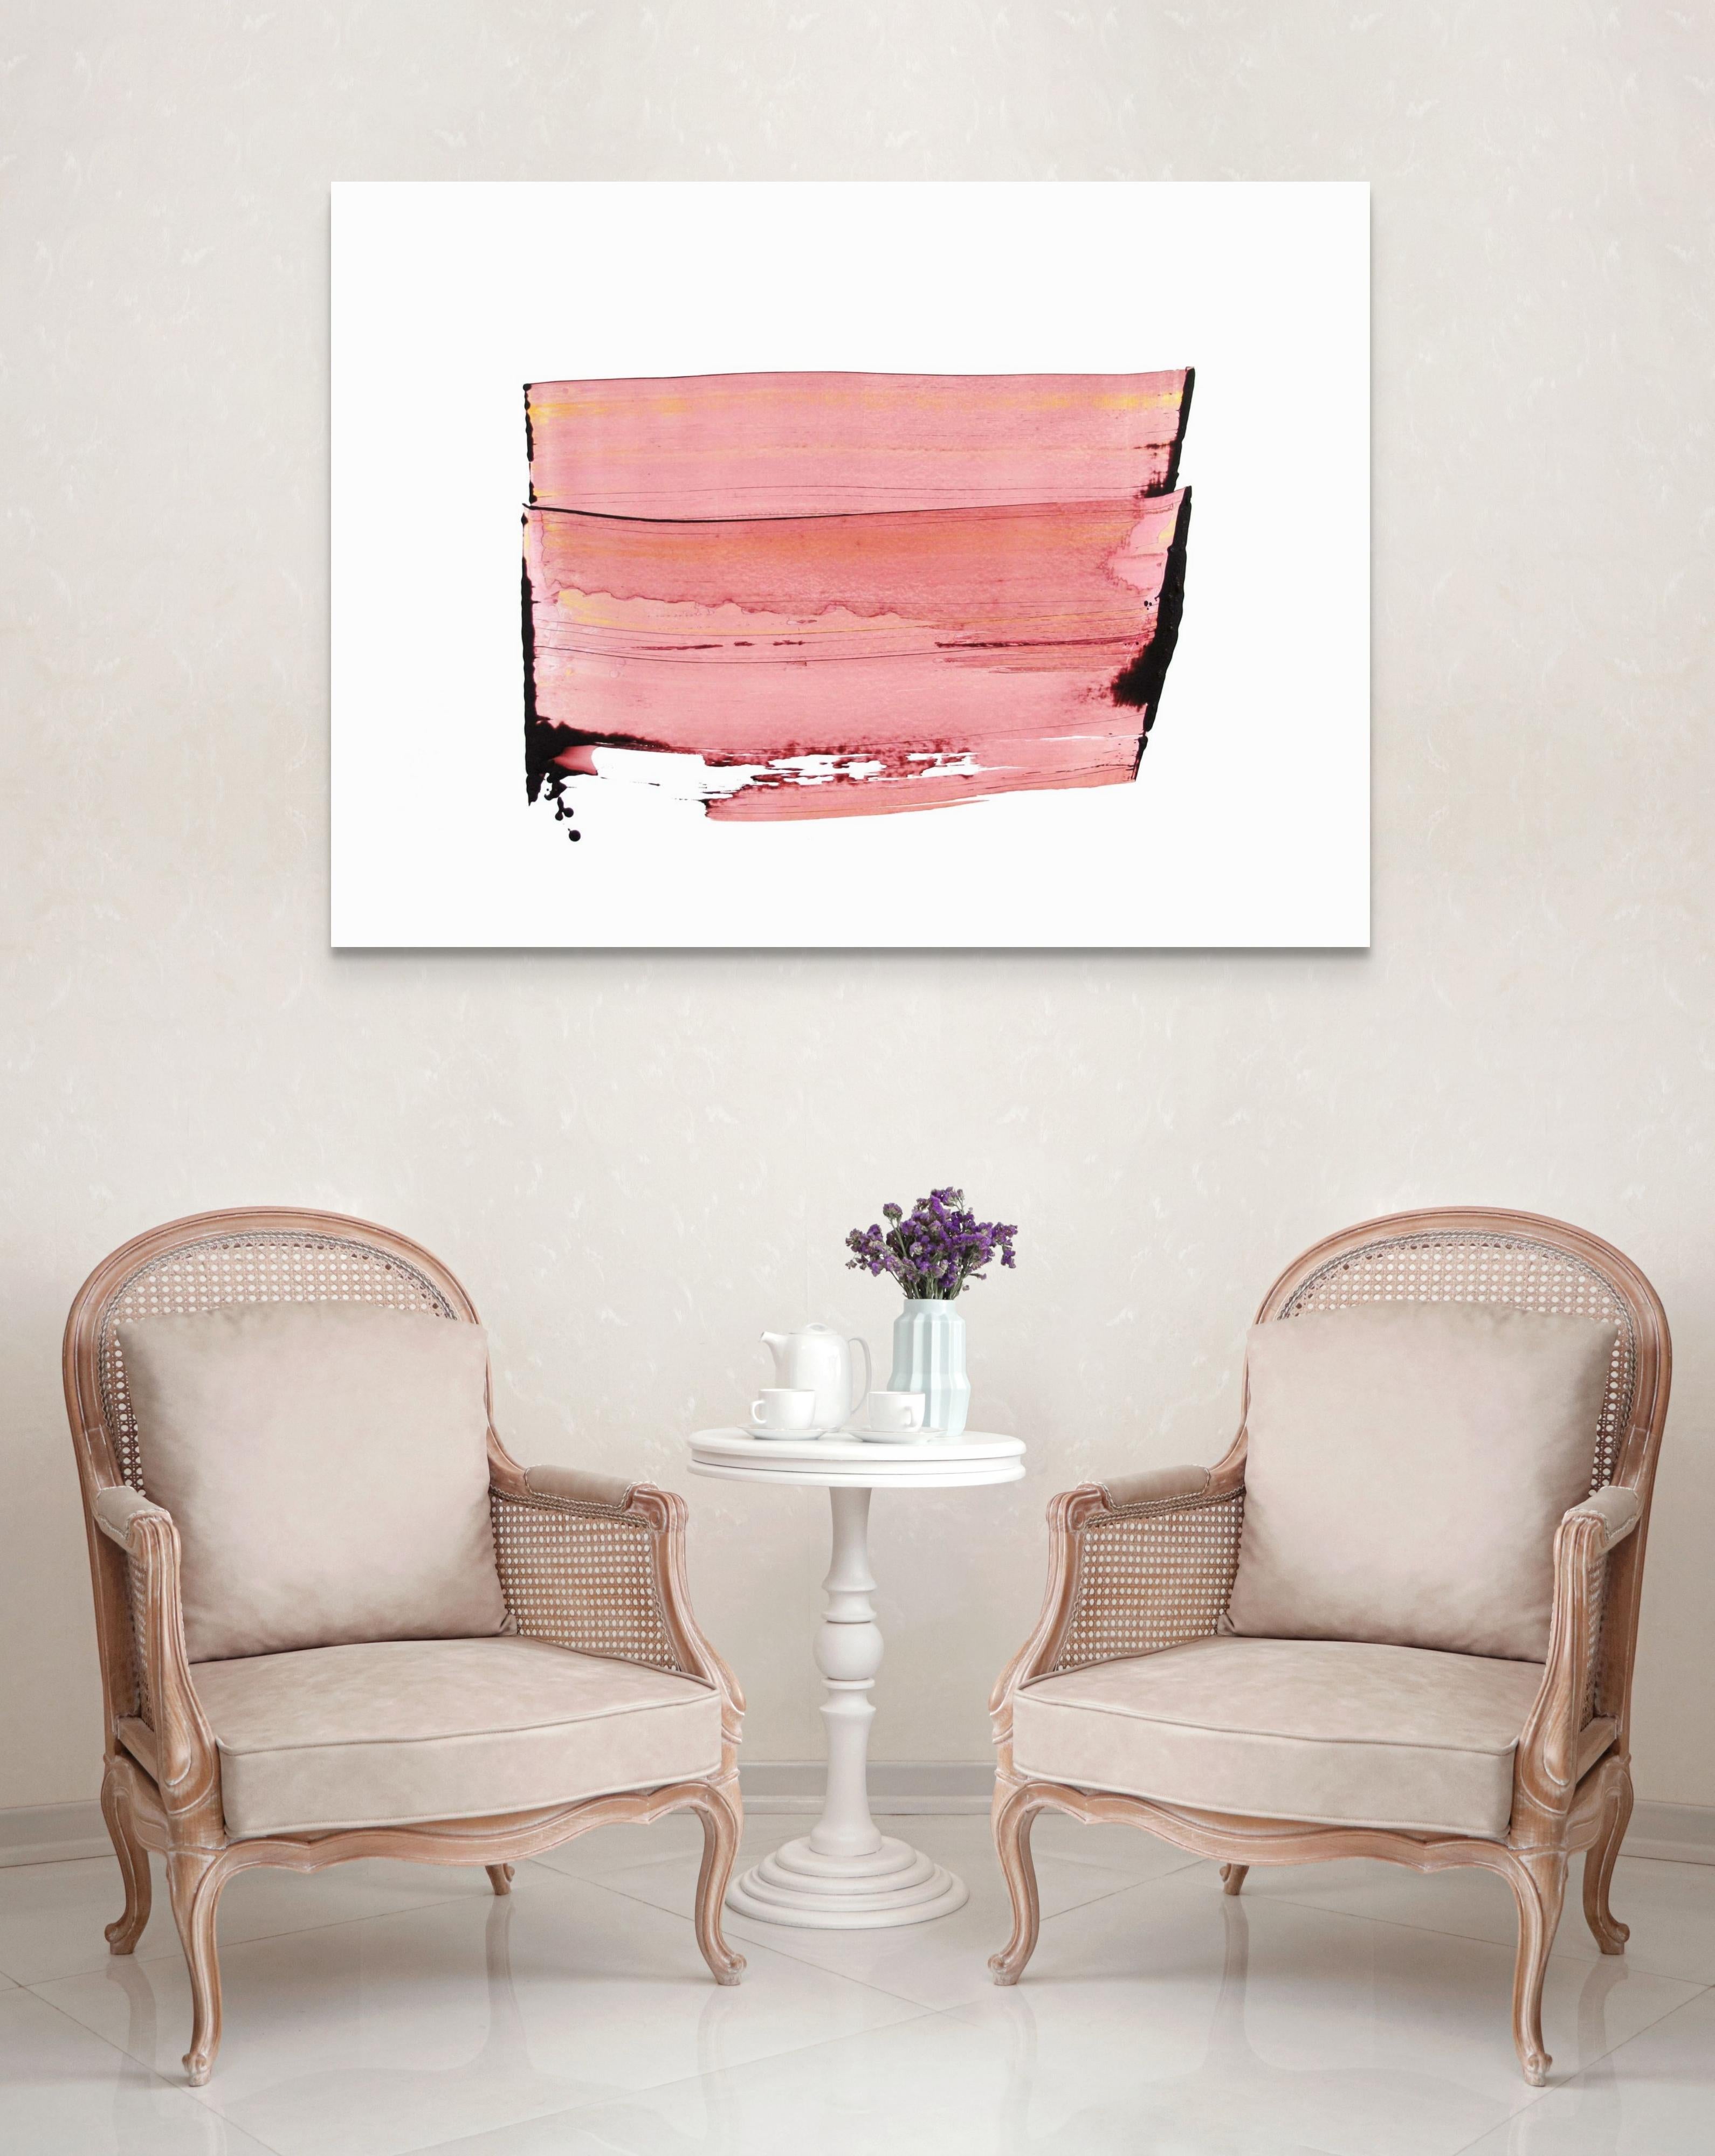 Memento (Soft Warmth) (Abstract Painting) For Sale 1